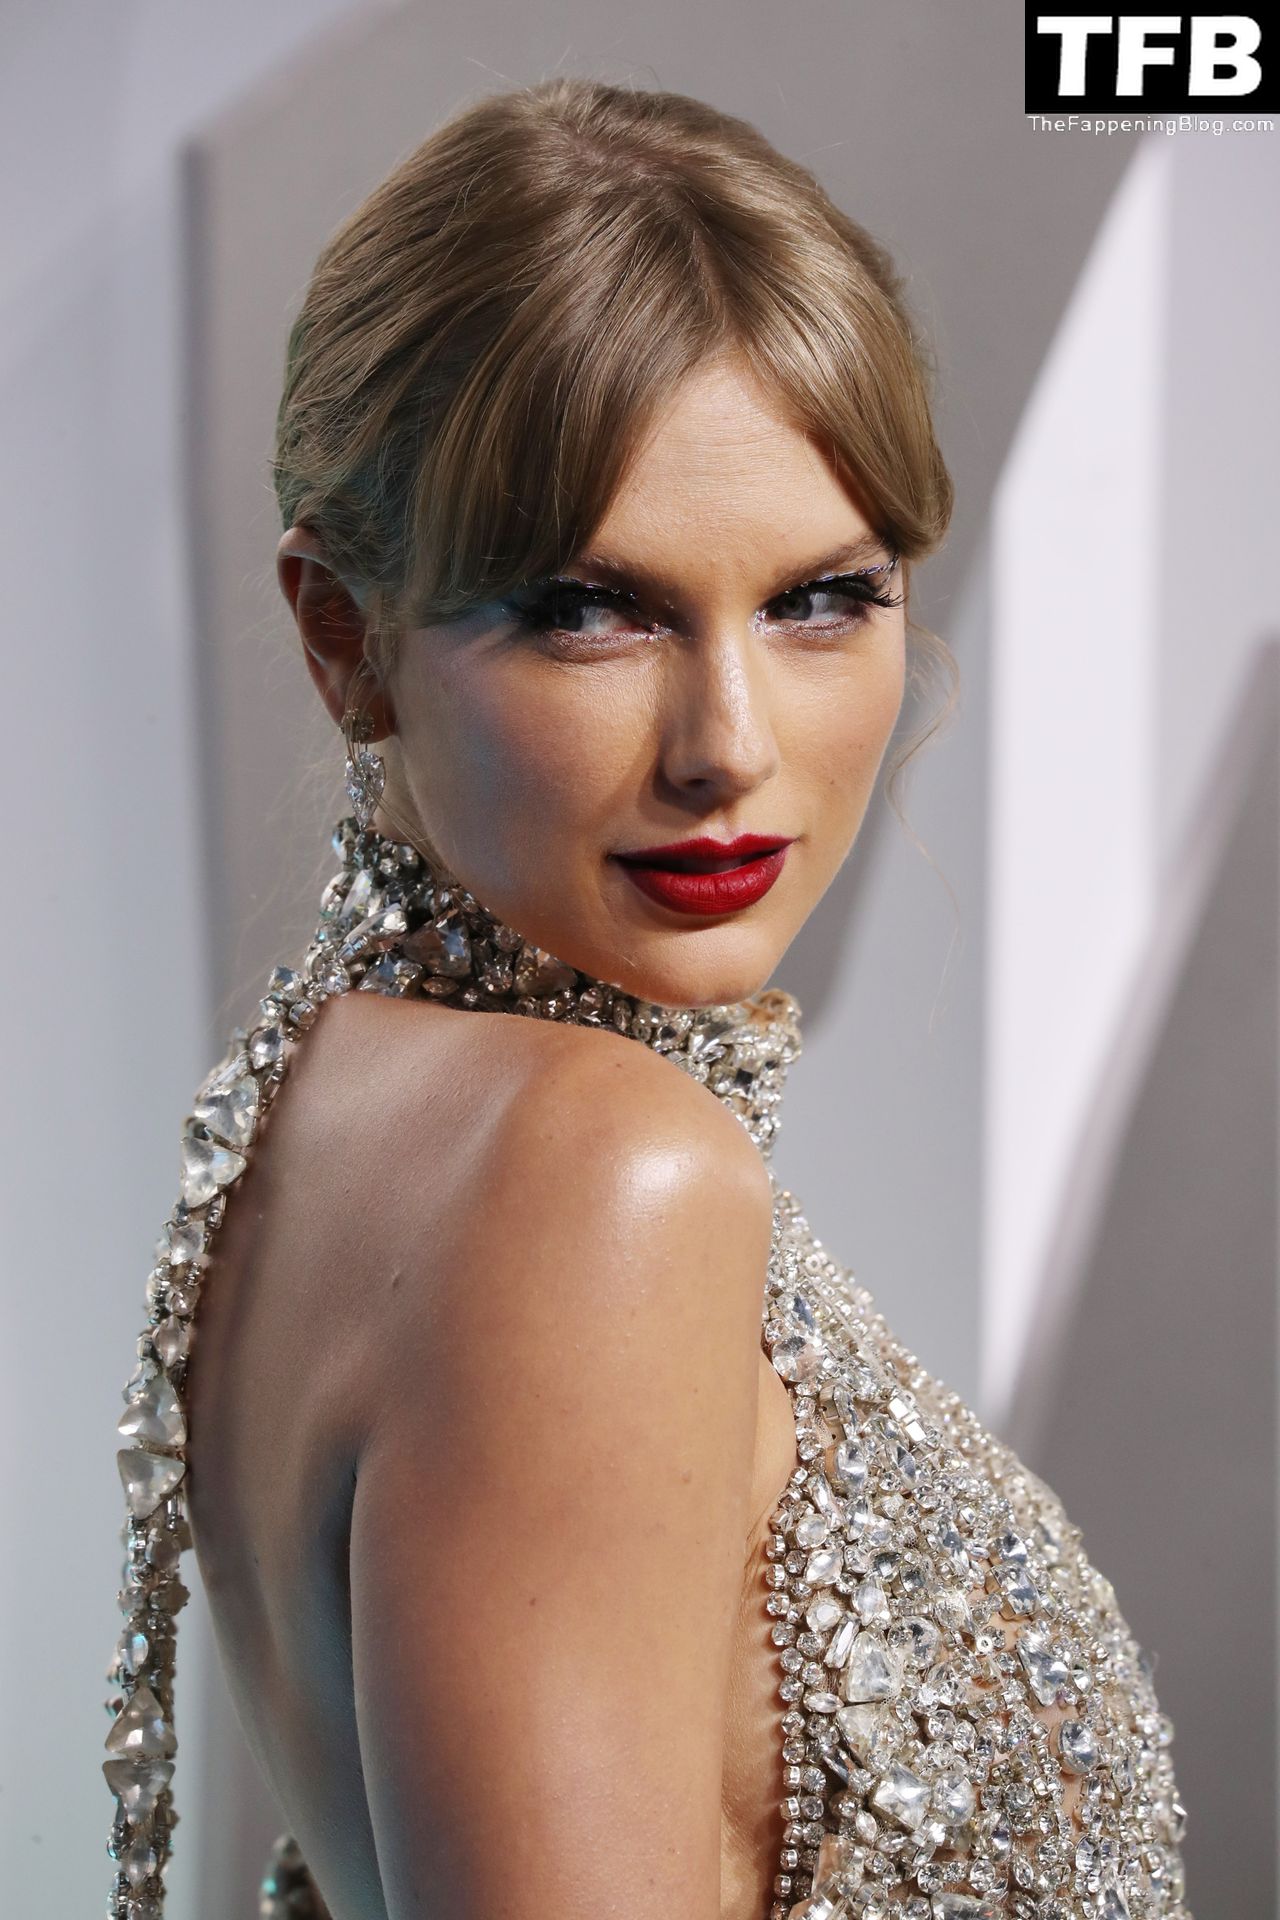 Taylor-Swift-Sexy-The-Fappening-Blog-80.jpg